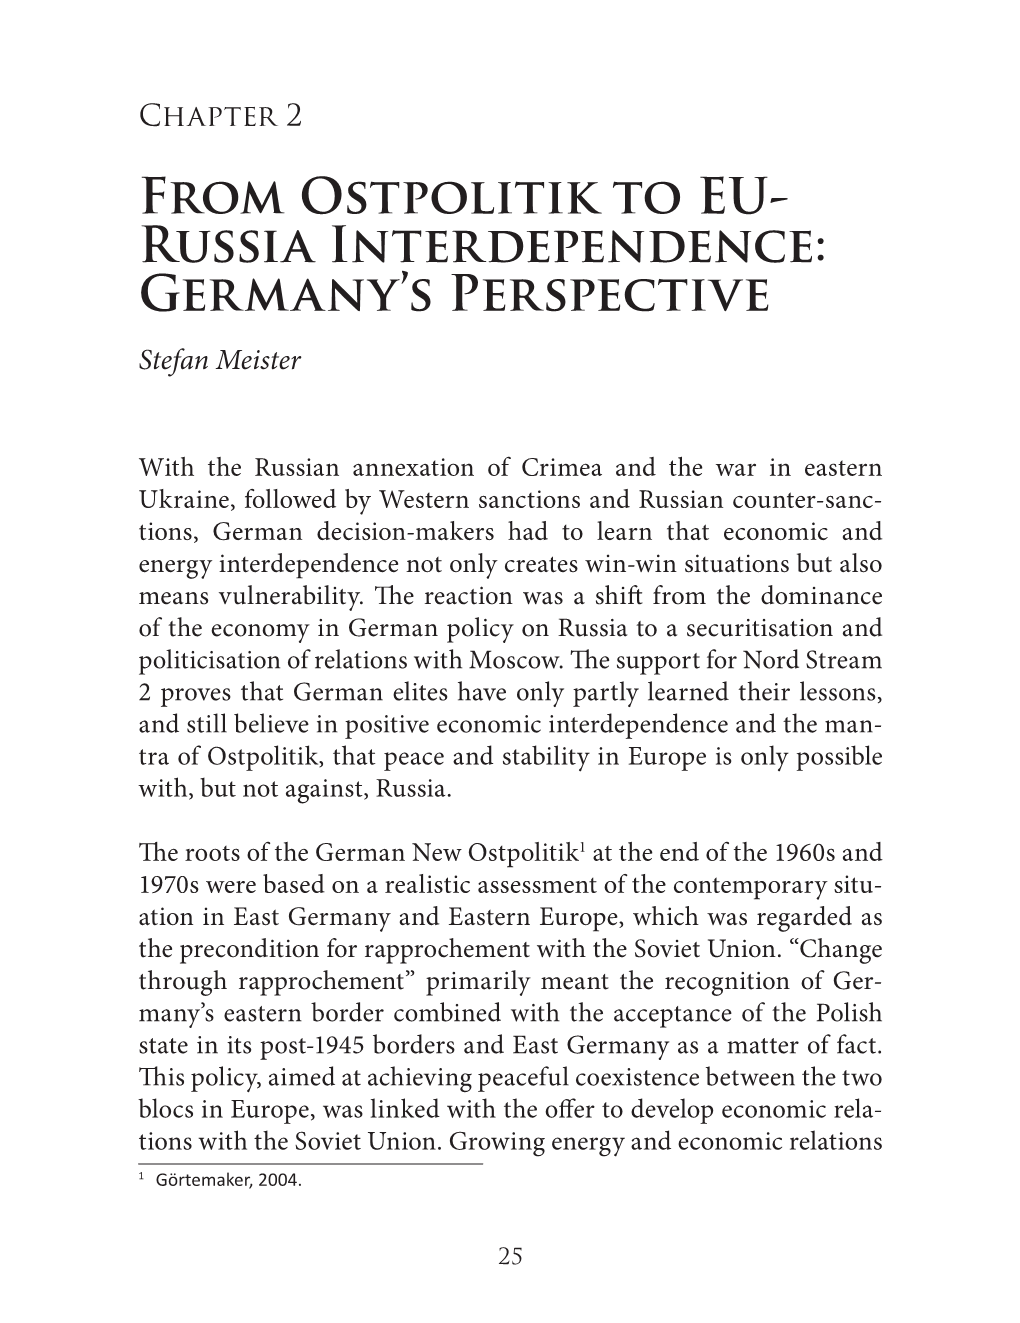 From Ostpolitik to EU- Russia Interdependence: Germany's Perspective